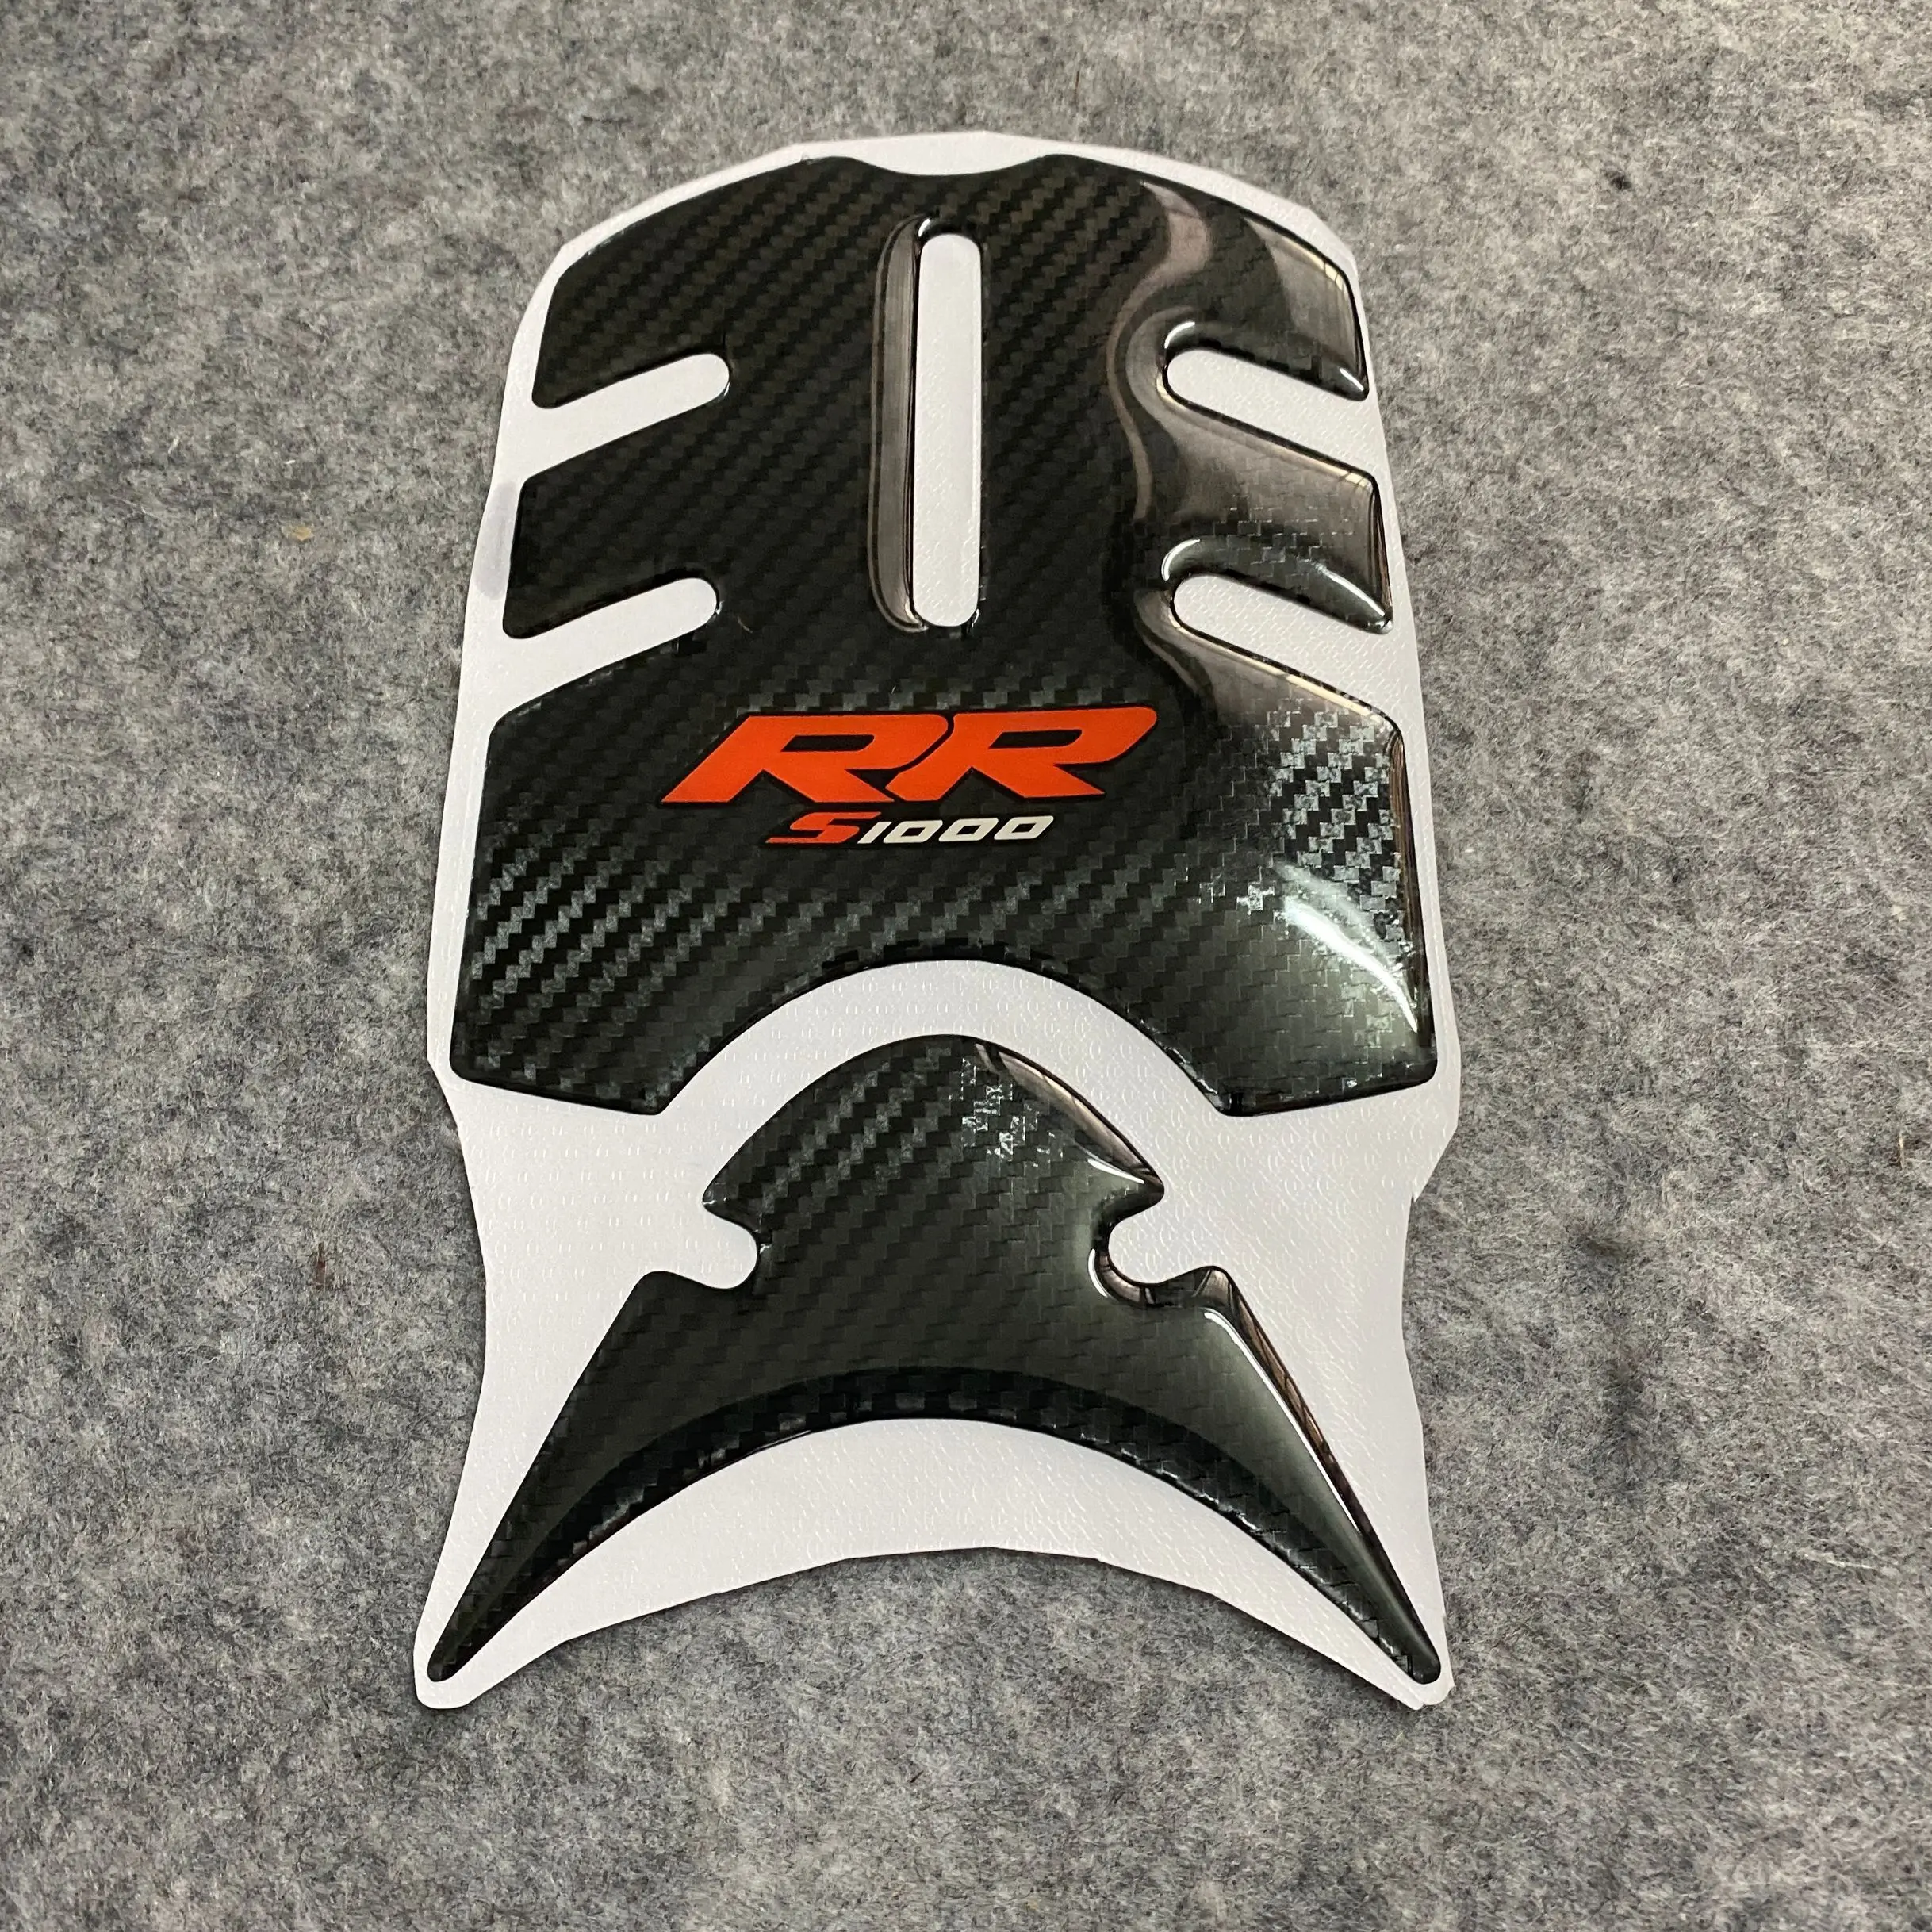 Buy 3D Motorcycle Front Gas Fuel Tank Cover Protector Pad Case tank cap sticker for BMW S1000RR S 1000 RR 2015-2017 2016 on